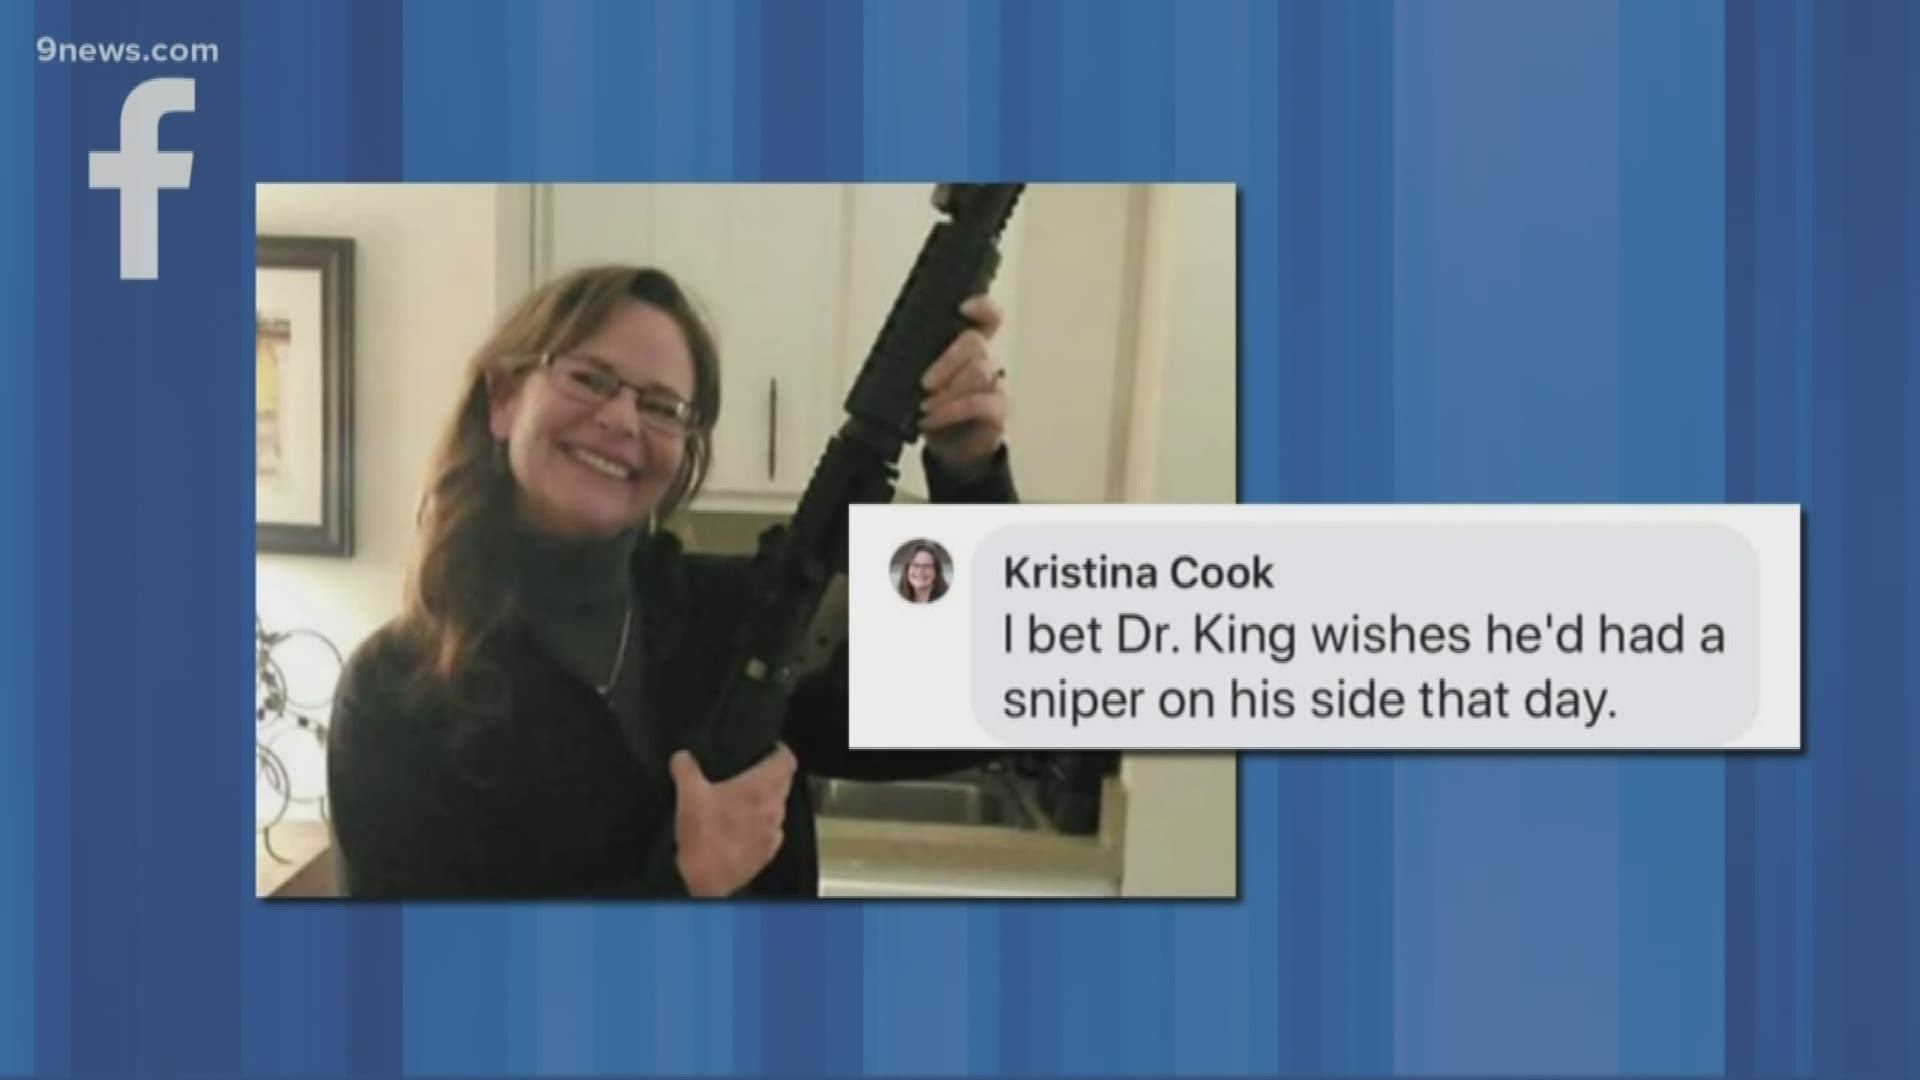 The chairwoman of the Denver Republican Party is defending her comment that Martin Luther King Jr. "wishes he'd had a sniper on his side" on the day he was killed.